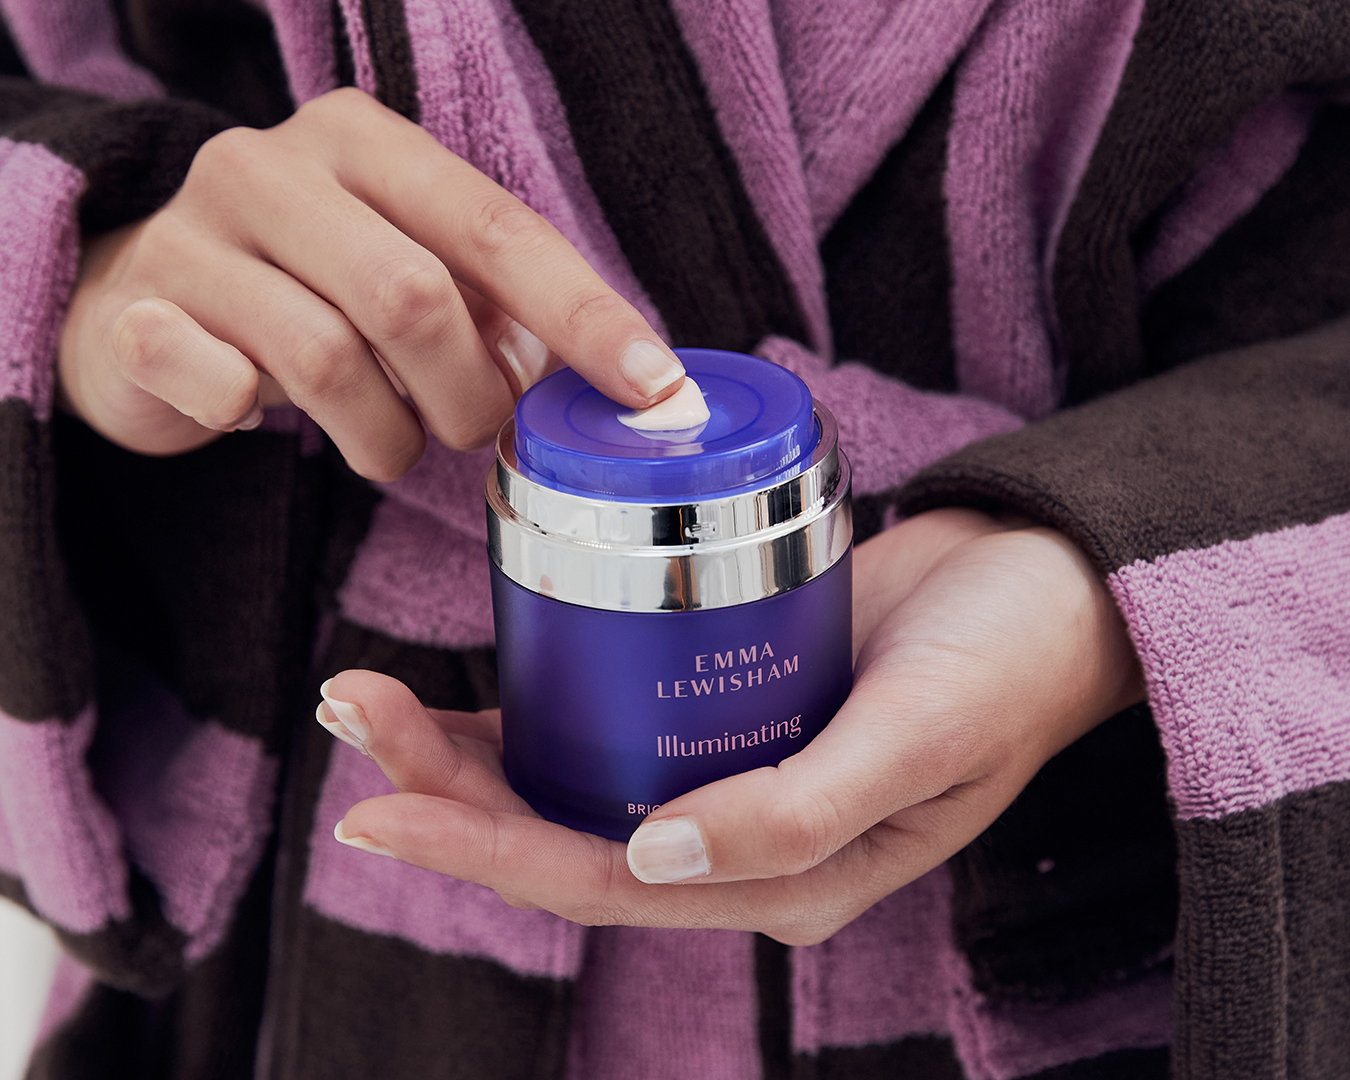 The Brighten your day creme is held in someone's hands.